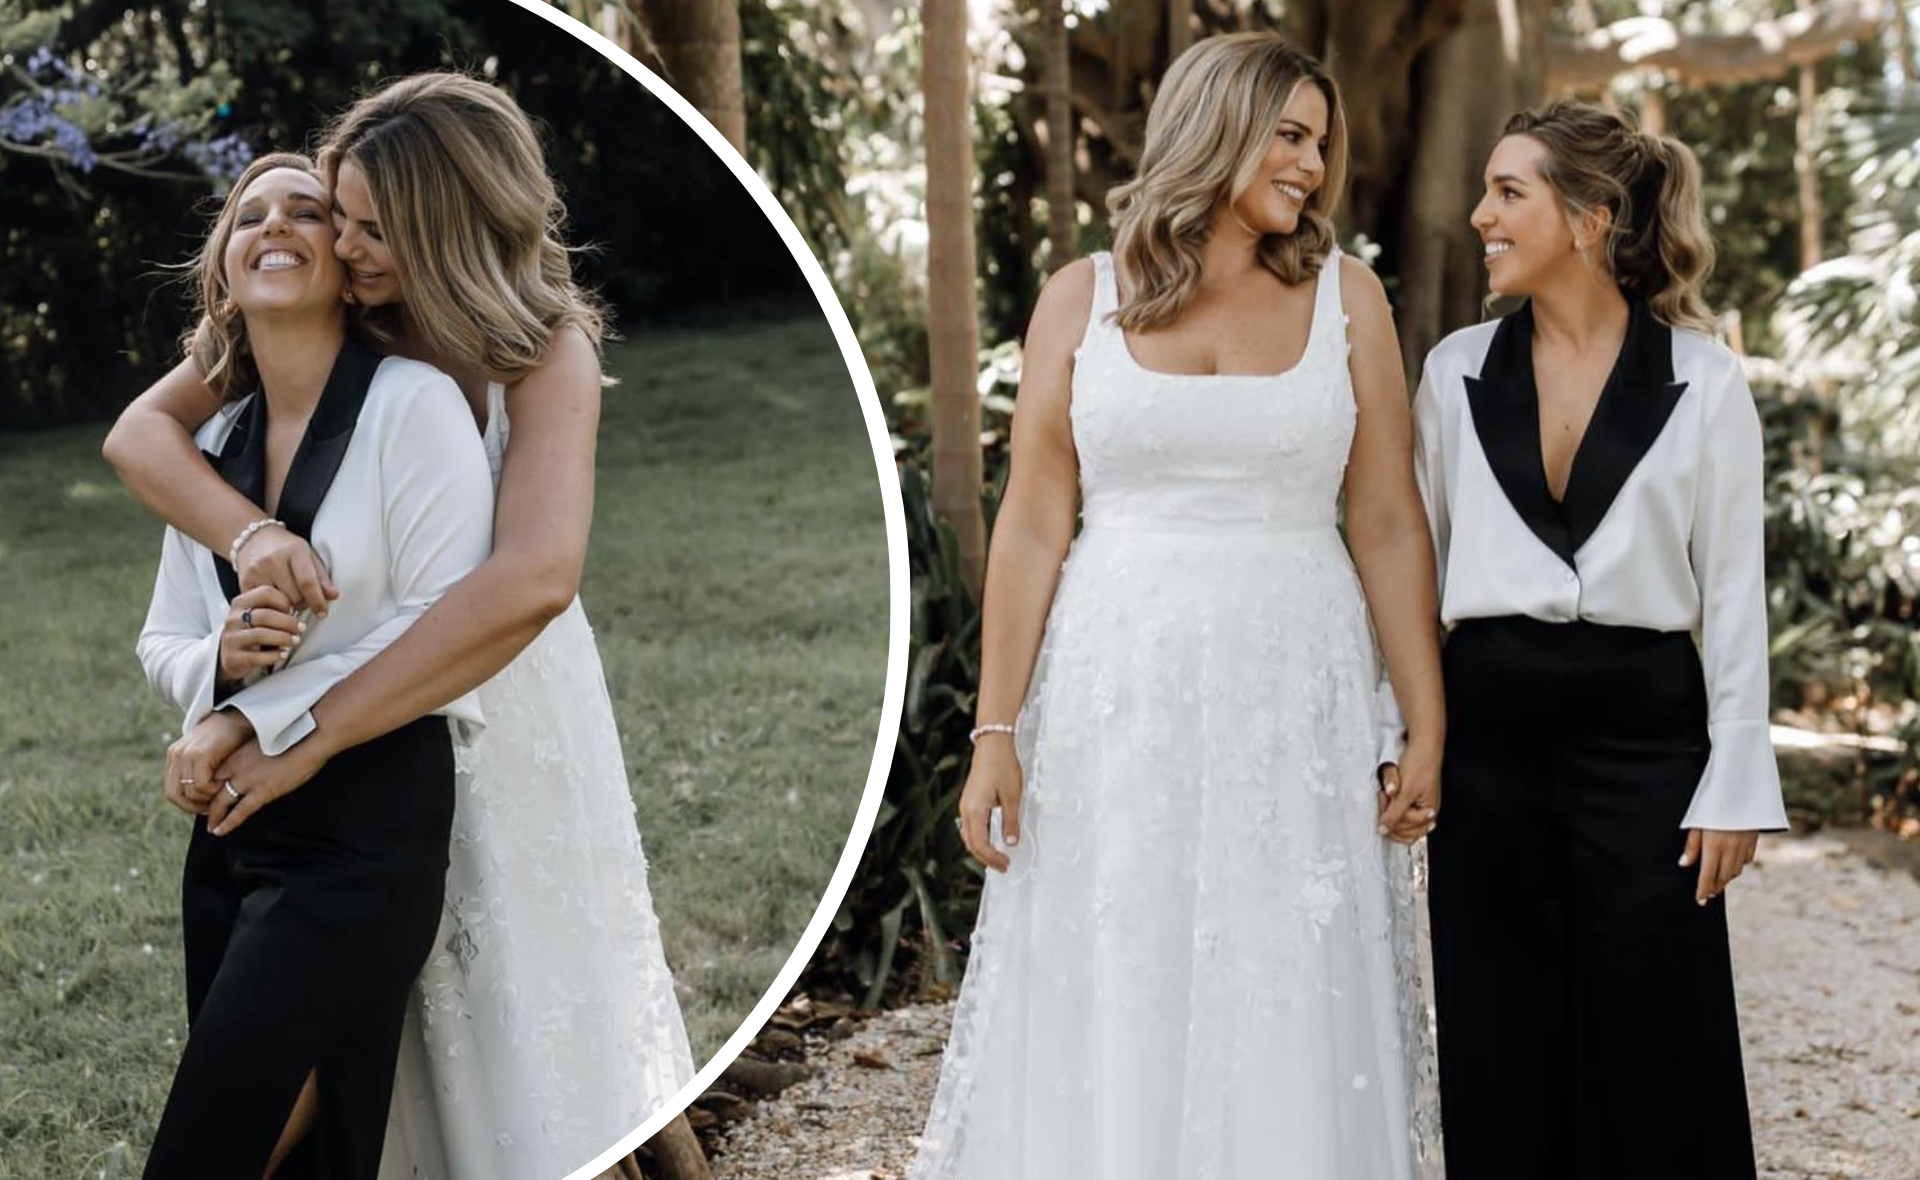 Fiona Falkiner and Hayley Willis tie the knot in stunning wedding ceremony